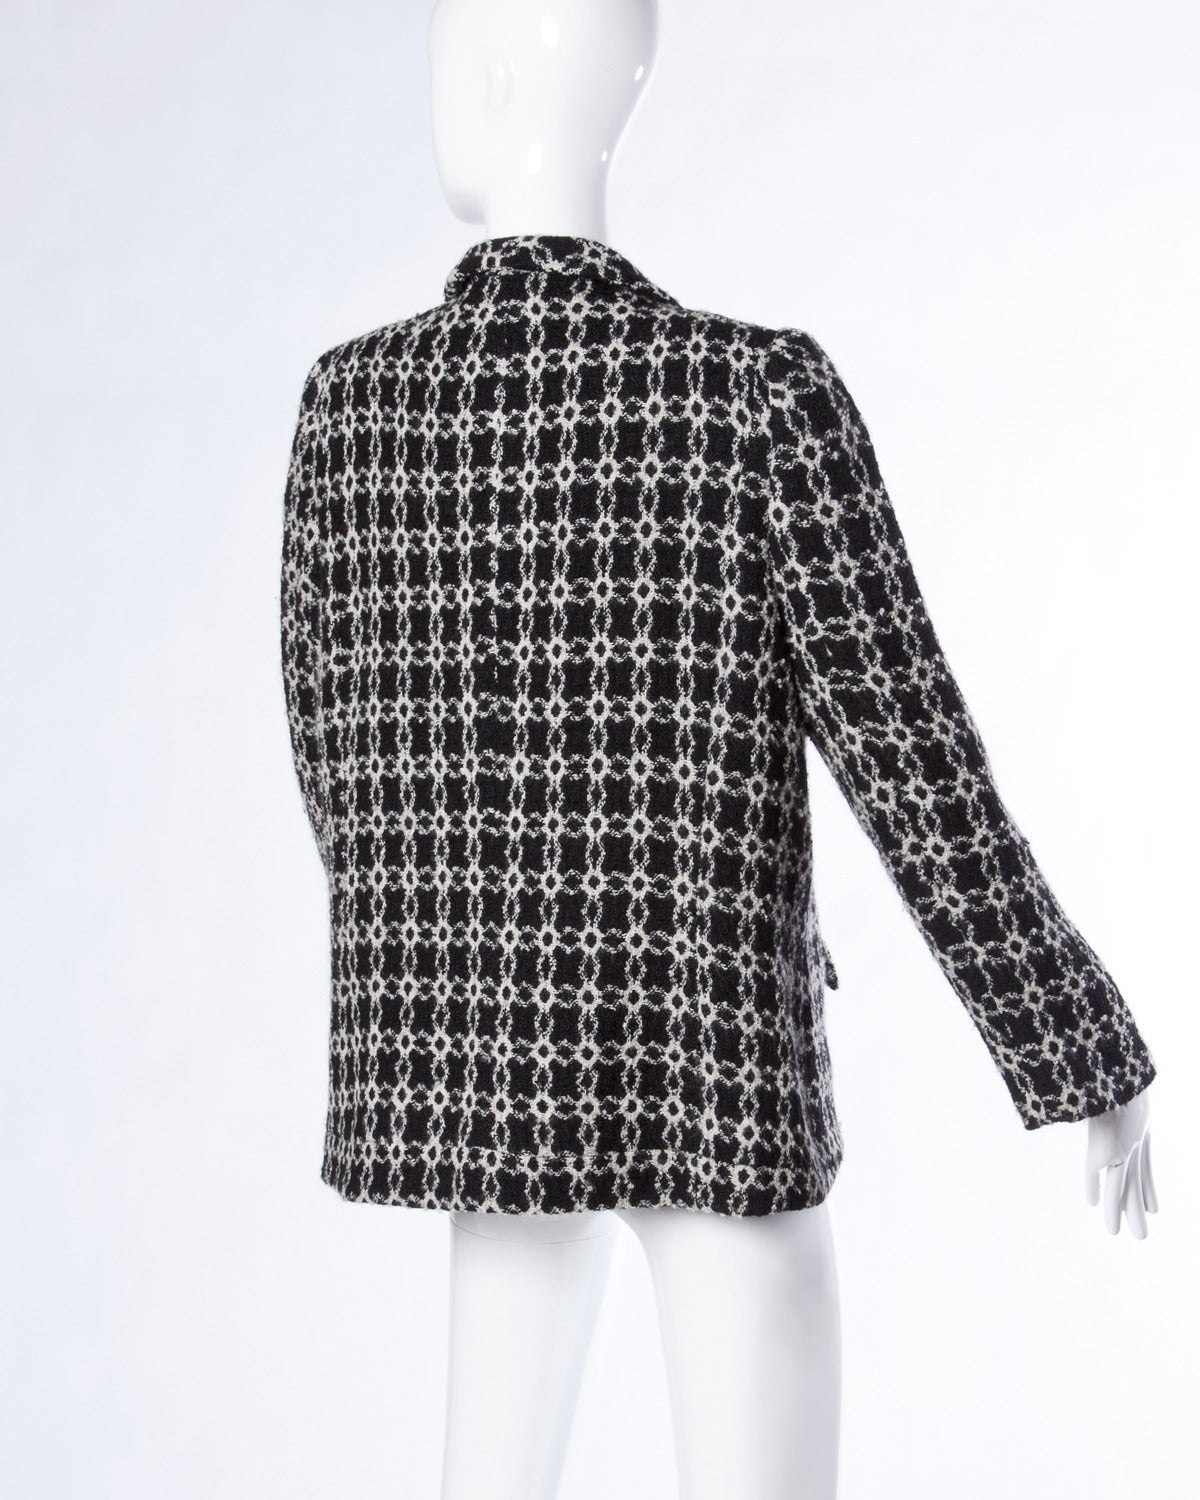 Pierre Cardin Vintage 1960s 60s Black + White Geometric Boxy Wool Jacket In Excellent Condition For Sale In Sparks, NV